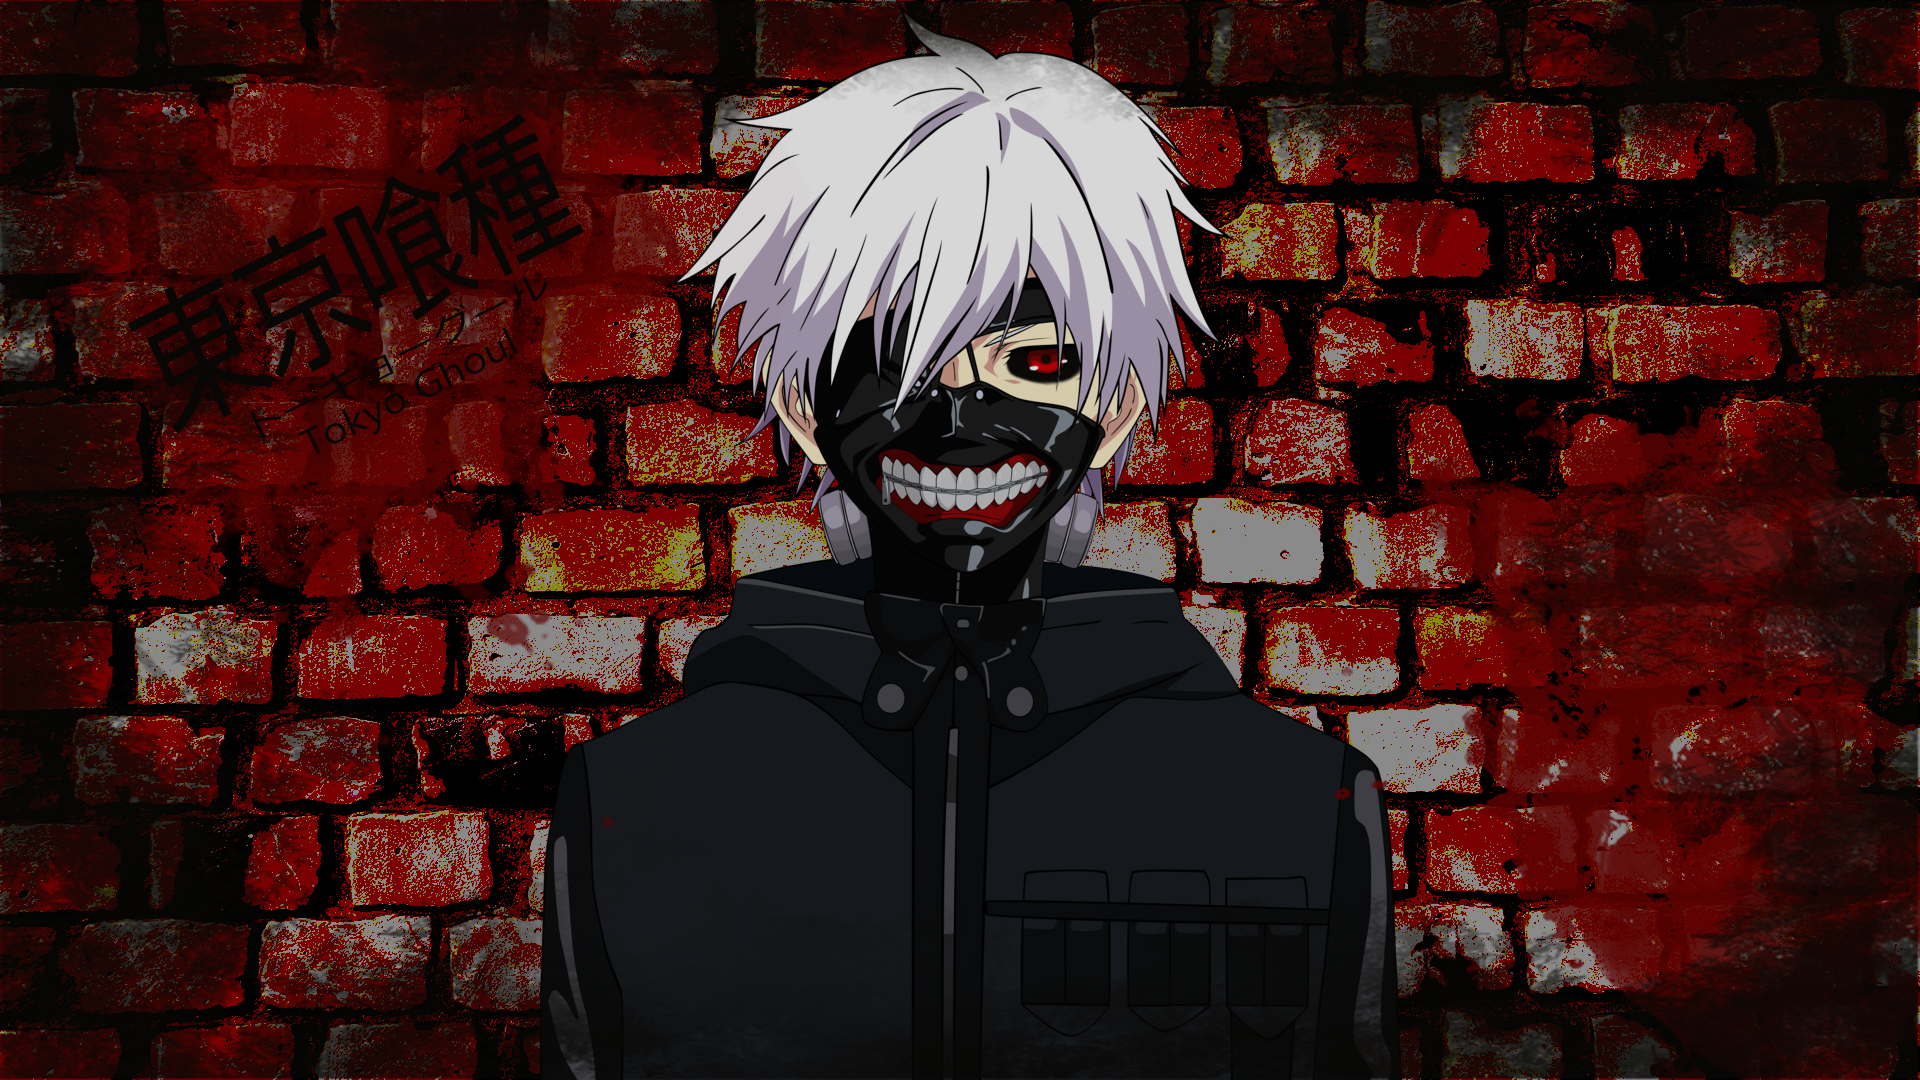 Tokyo Ghoul - BR + Animes